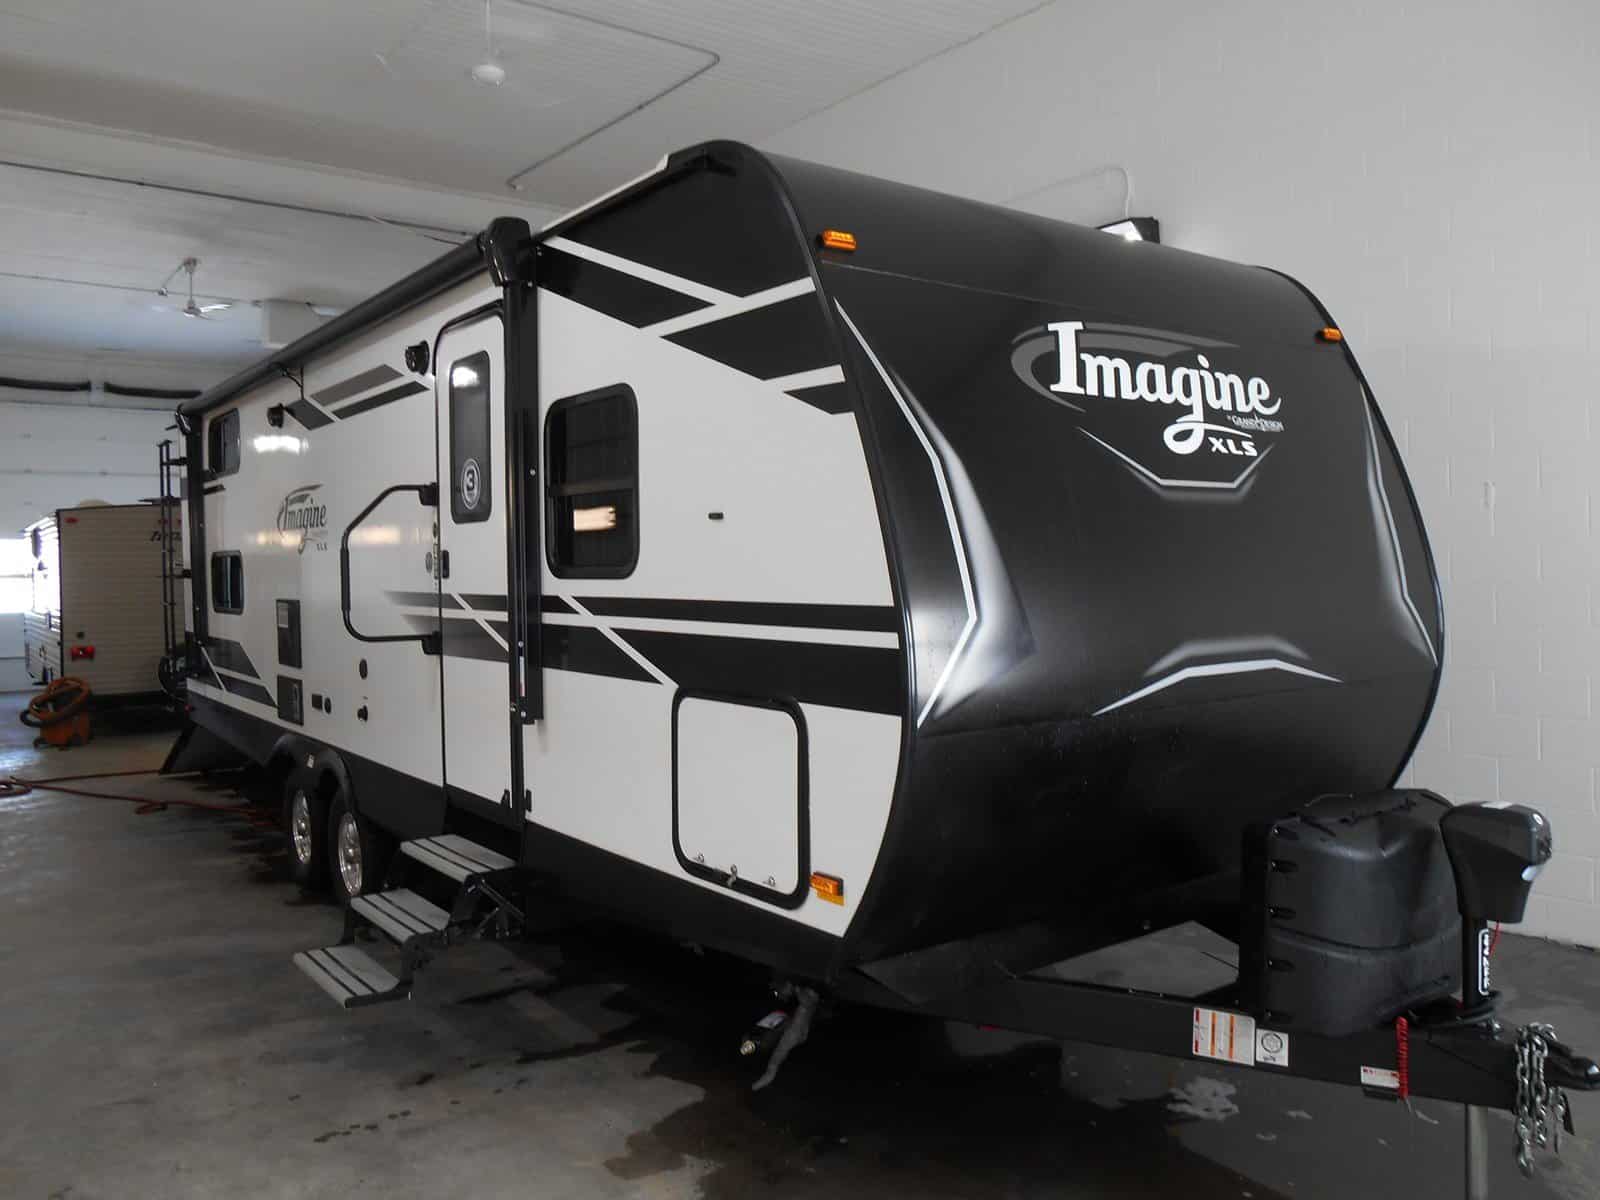 5 Best Travel Trailers with Murphy Beds (January 2021)